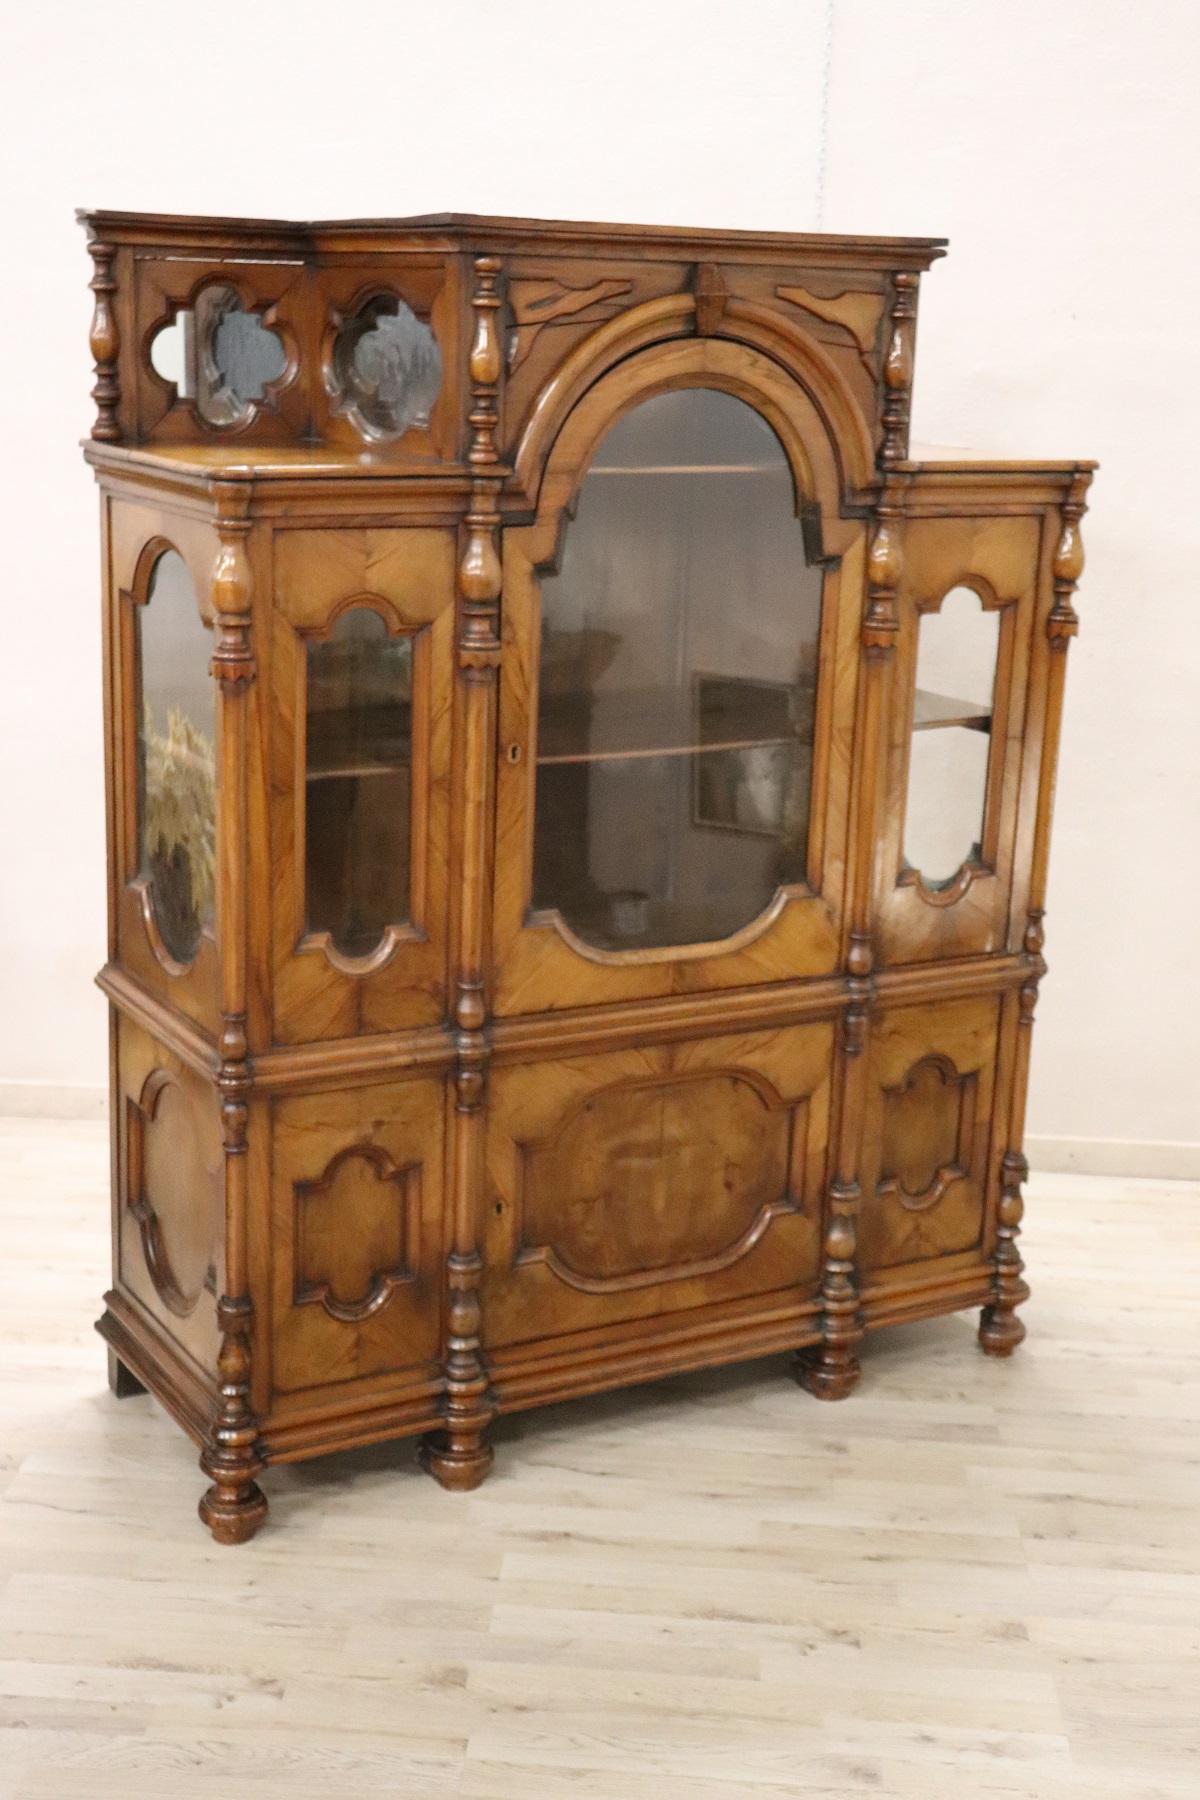 Antique Italian vitrine 1880s in solid walnut wood of a beautiful antique patina! Large internal useful space. Beautiful majestic line. Beautiful and fine antique glass. On the front splendid turned columns. Glass also on the sides to show your